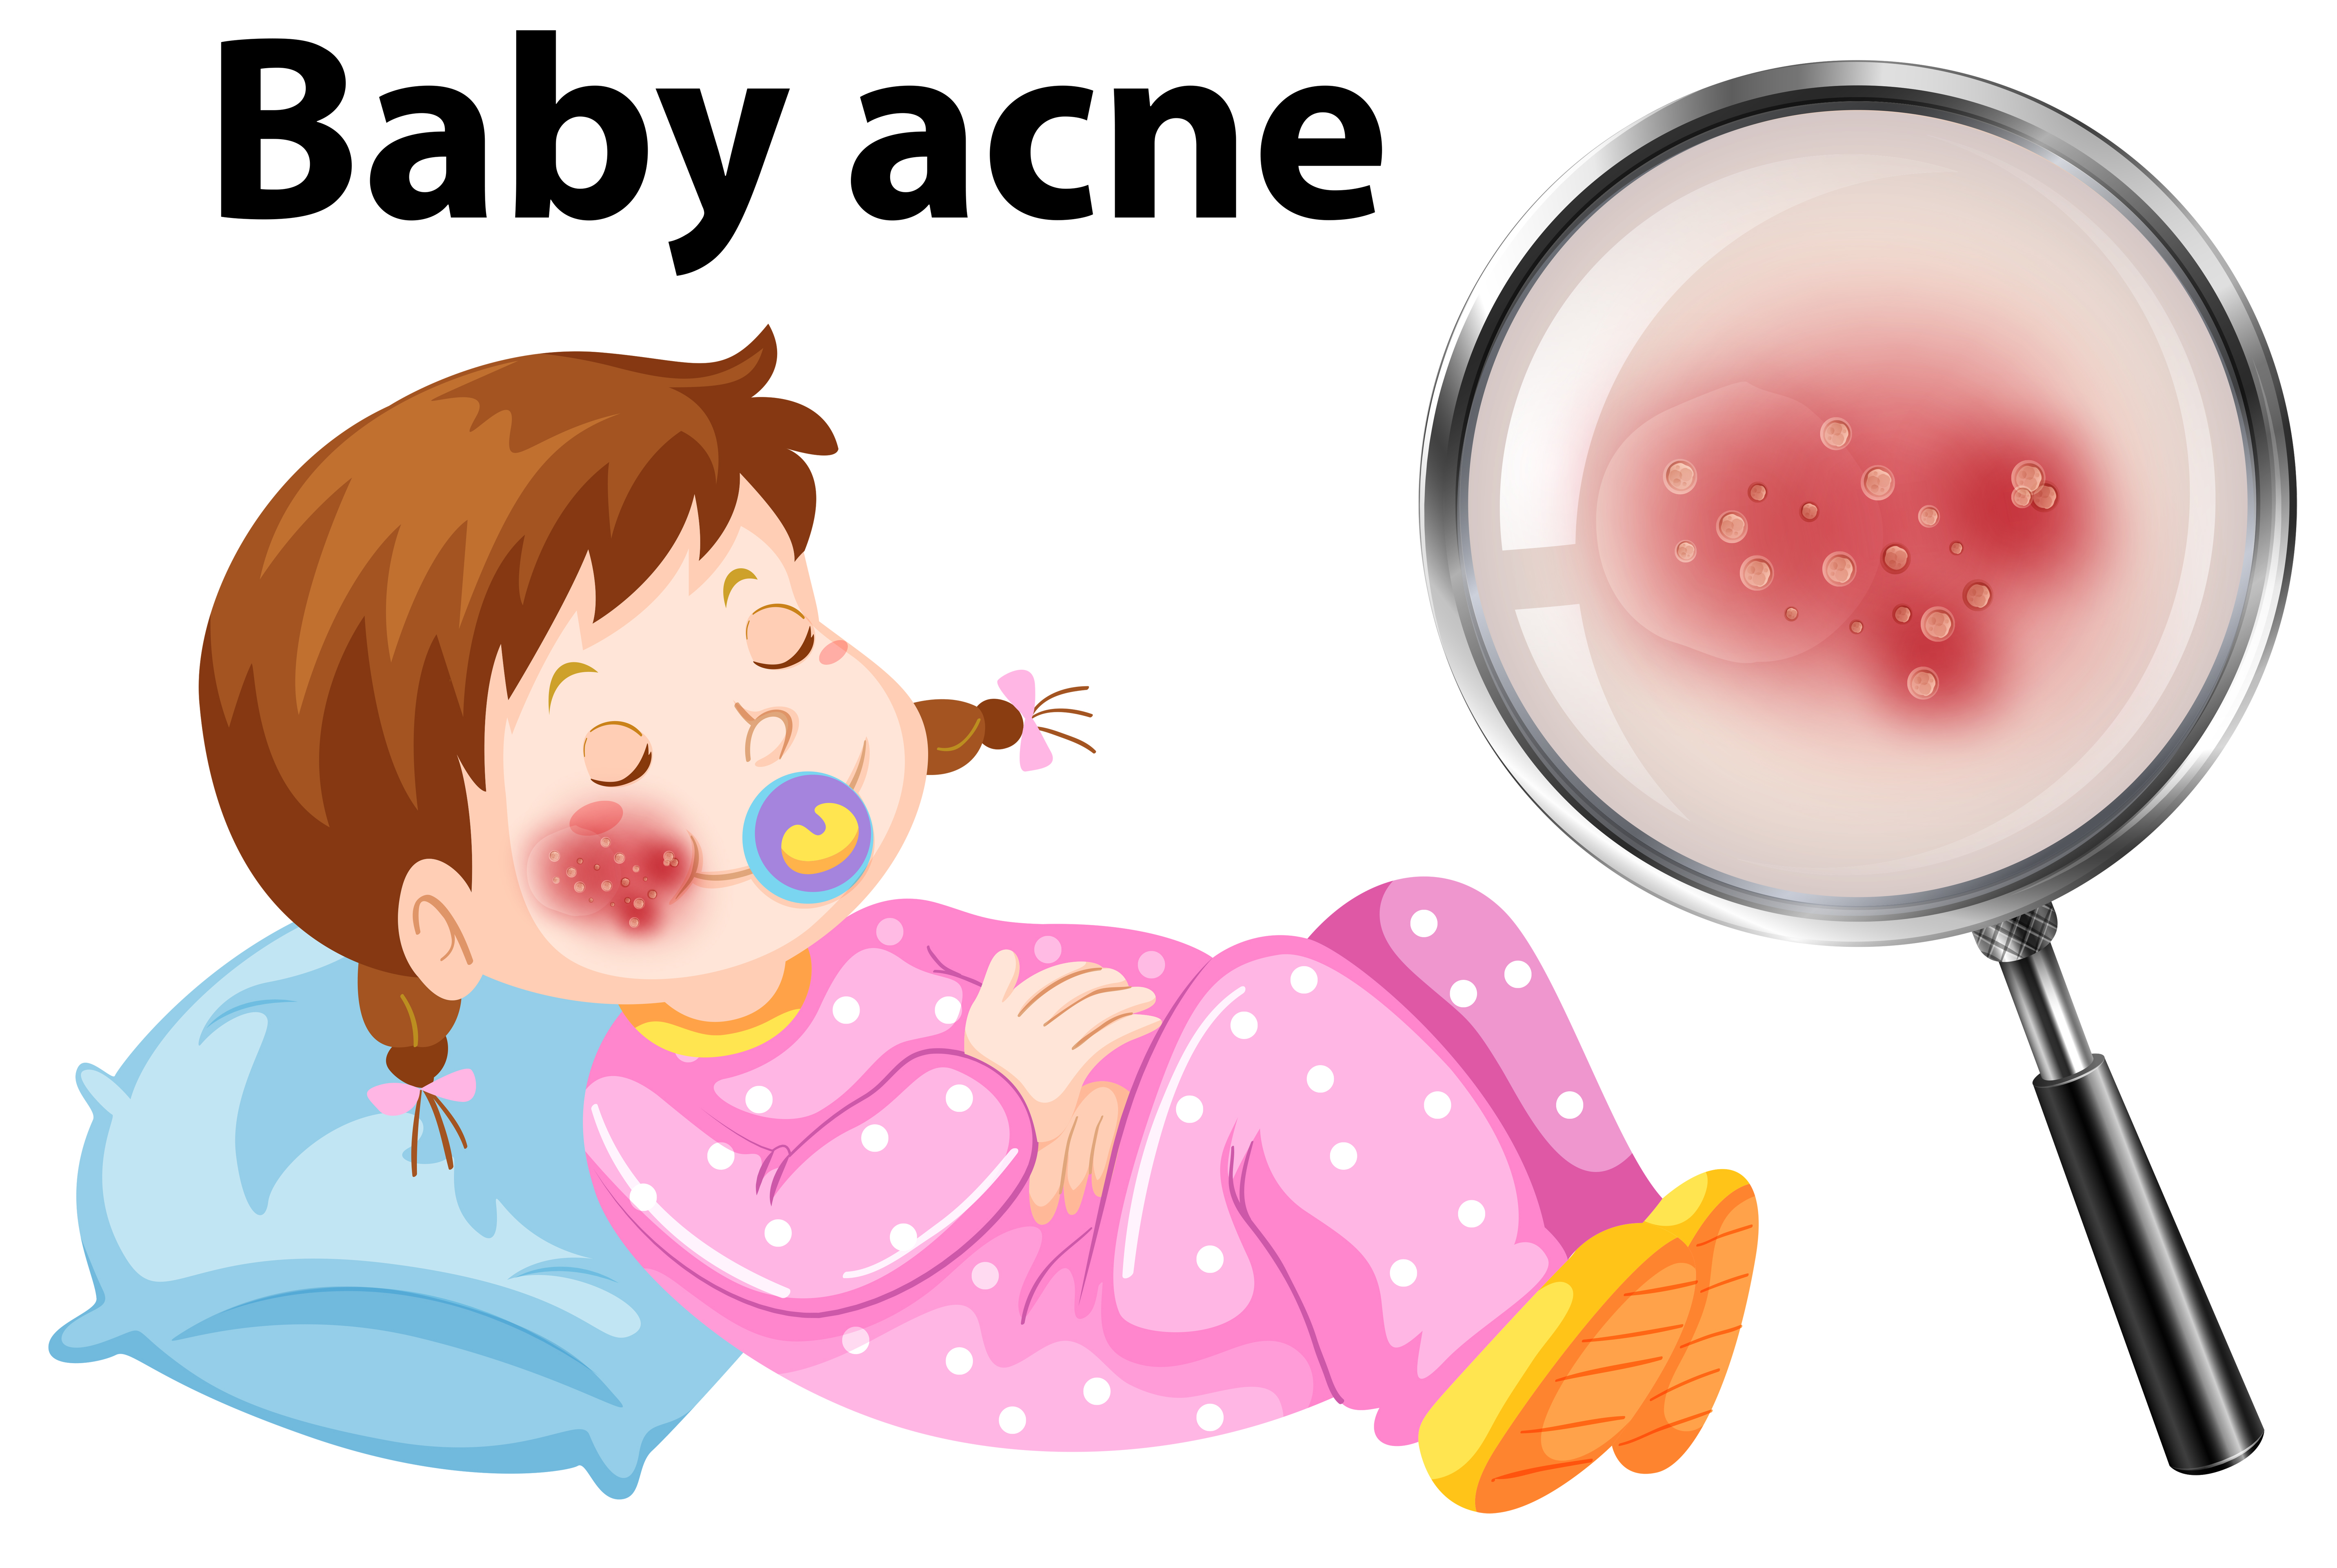 Download A Baby Acne on Face - Download Free Vectors, Clipart ...